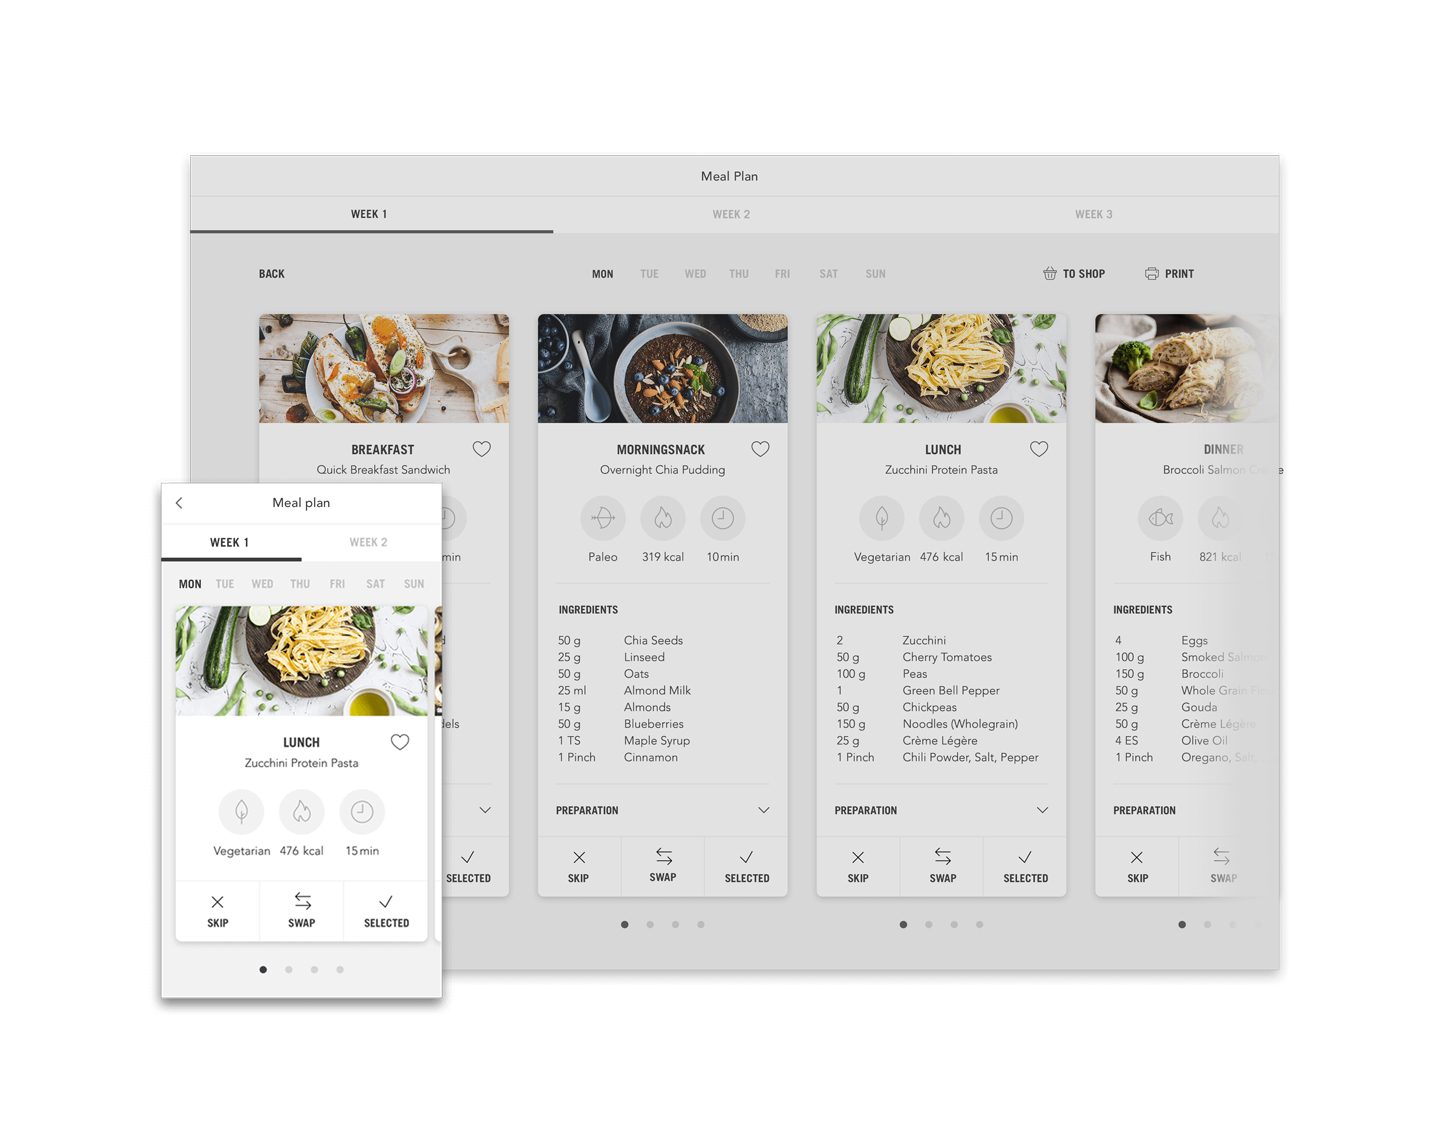 Example of an Upfit meal plan on desktop and mobile